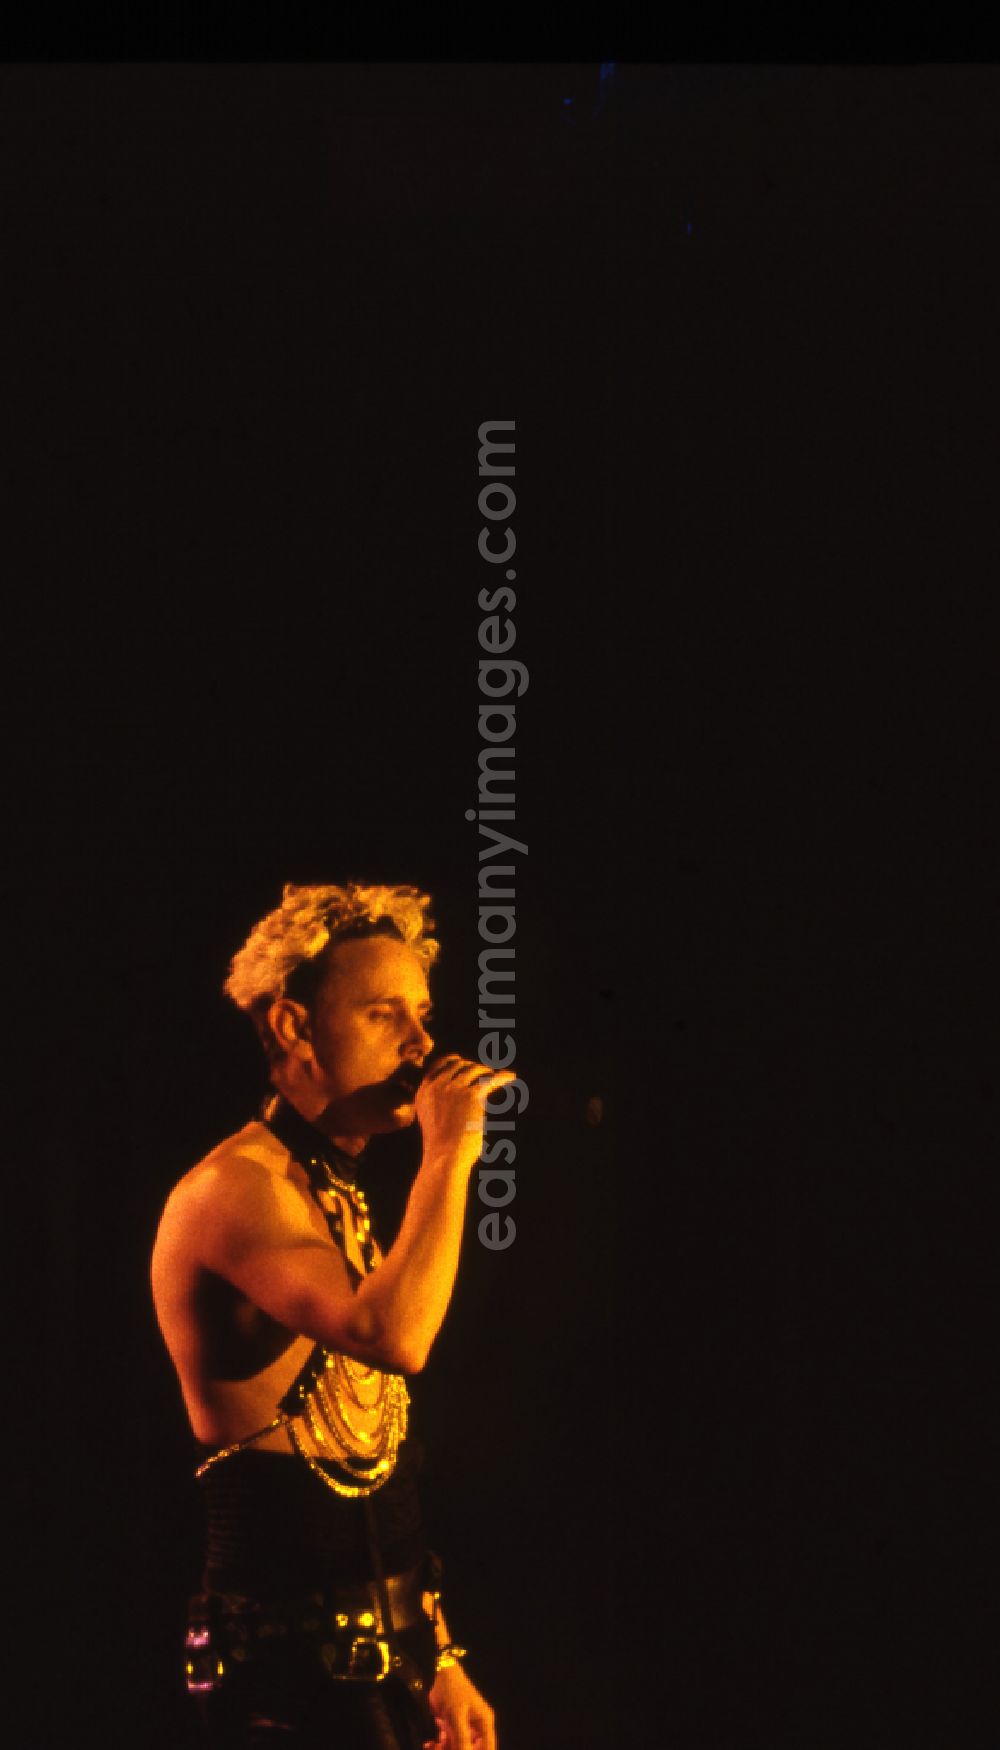 Berlin: Concert by the synth rock and synth pop group Depeche Mode at the Werner Seelenbinder Halle in Berlin Eastberlin on the territory of the former GDR, German Democratic Republic